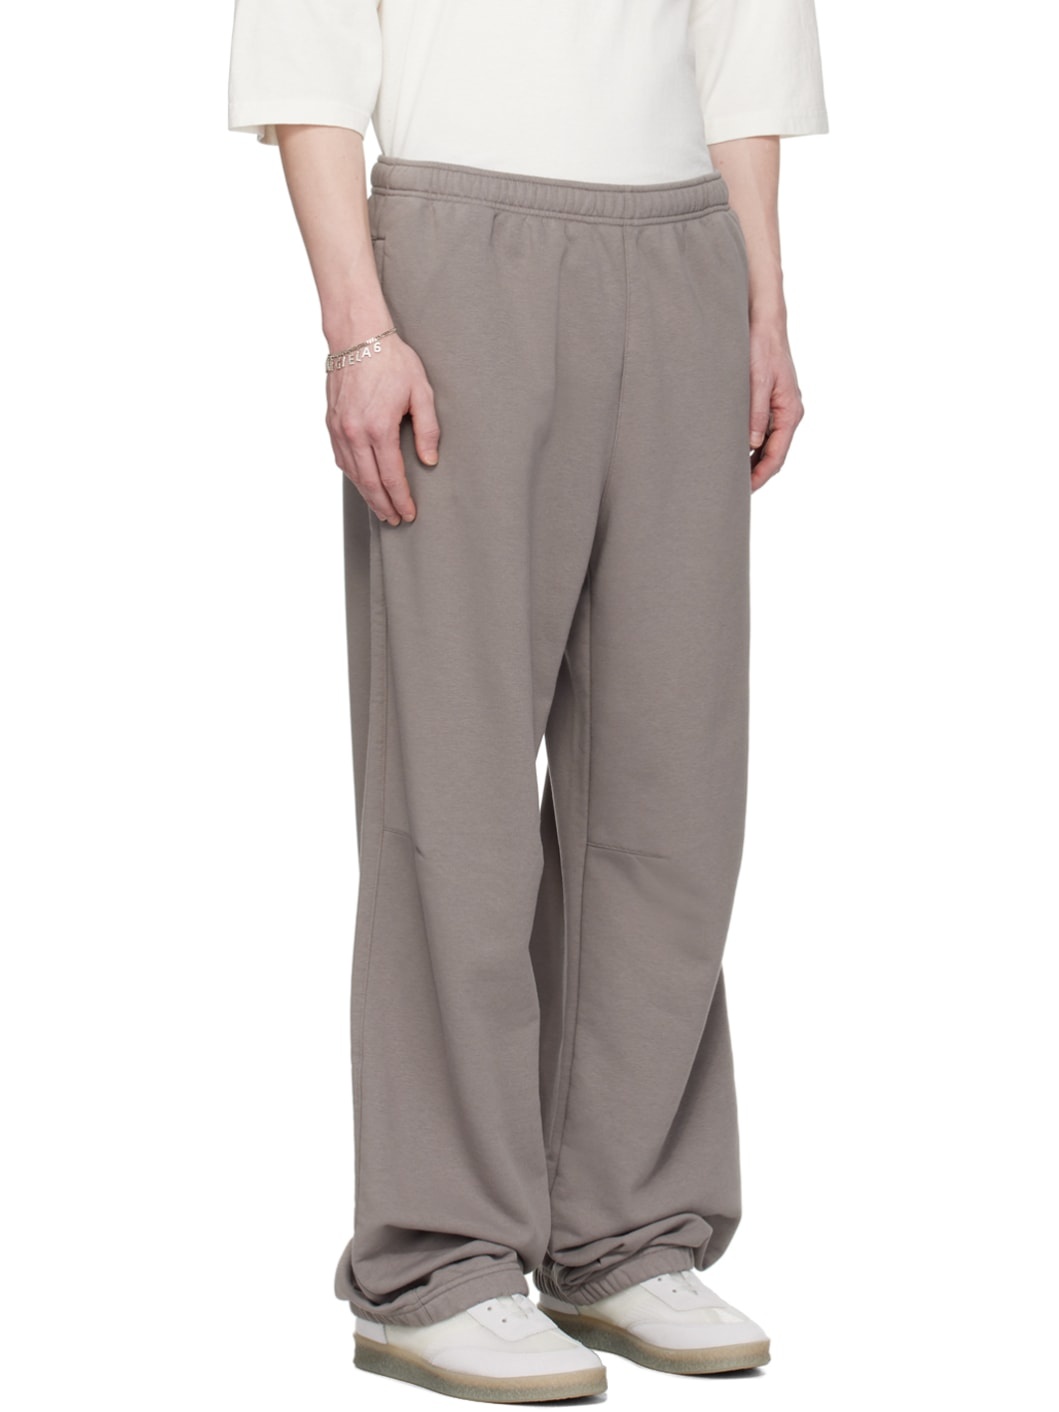 Taupe Embroidered Sweatpants - 2